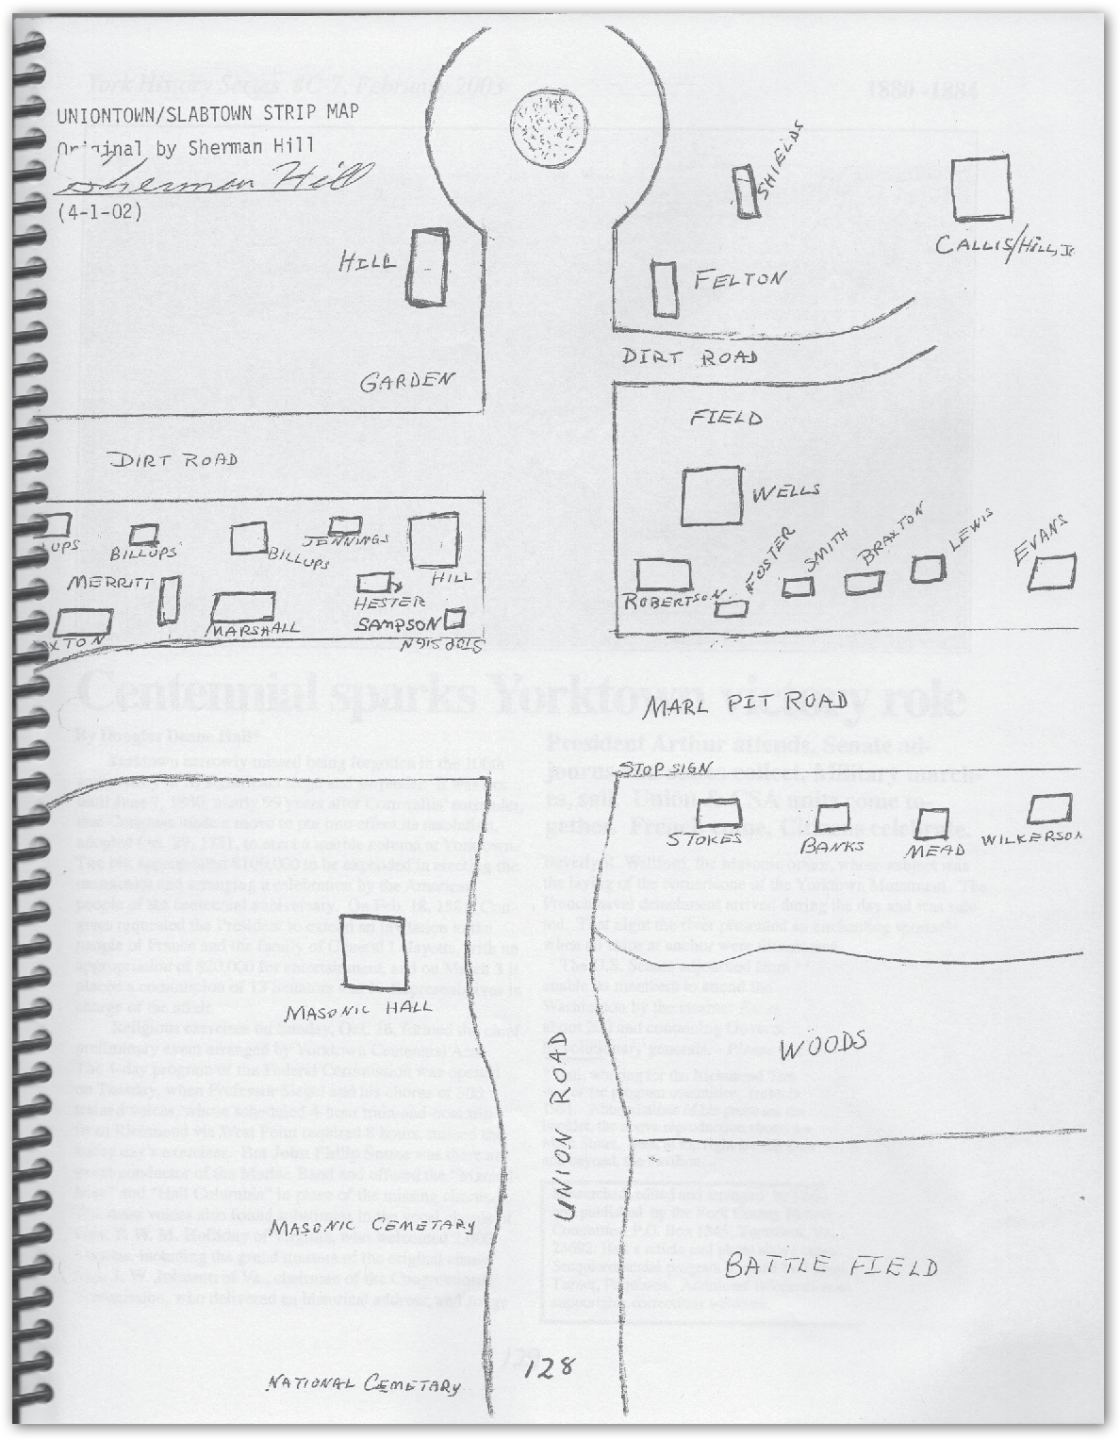 A map drawn by former Slabtown resident Sherman Hill.